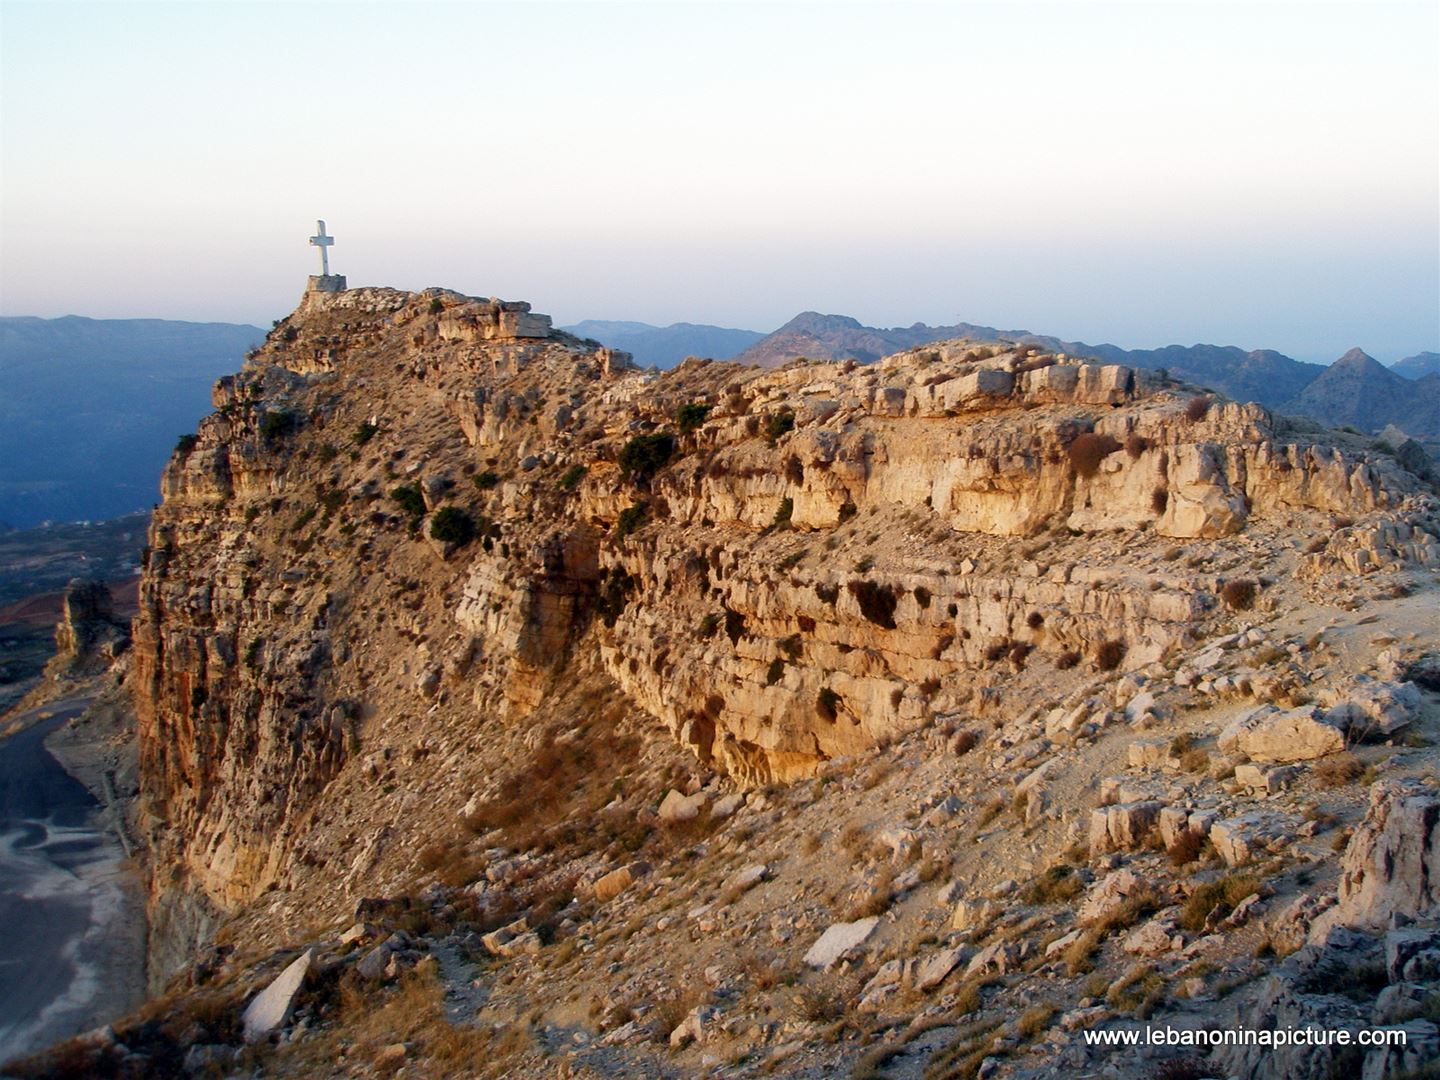 A Hike Between Akoura and Laqlouq